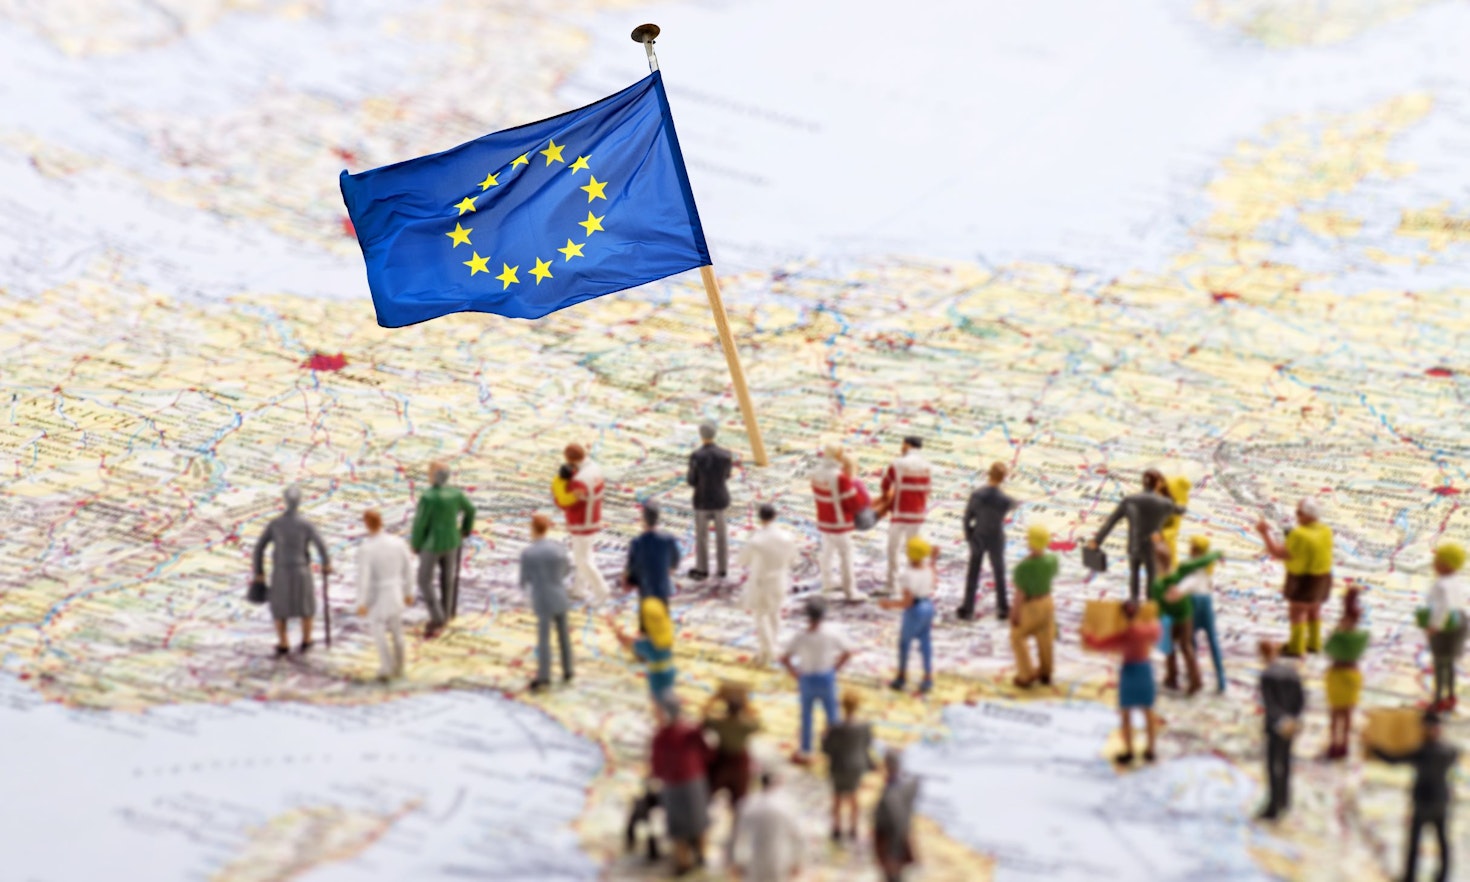 Outdated or timely? The role of fundamental rights in the EU